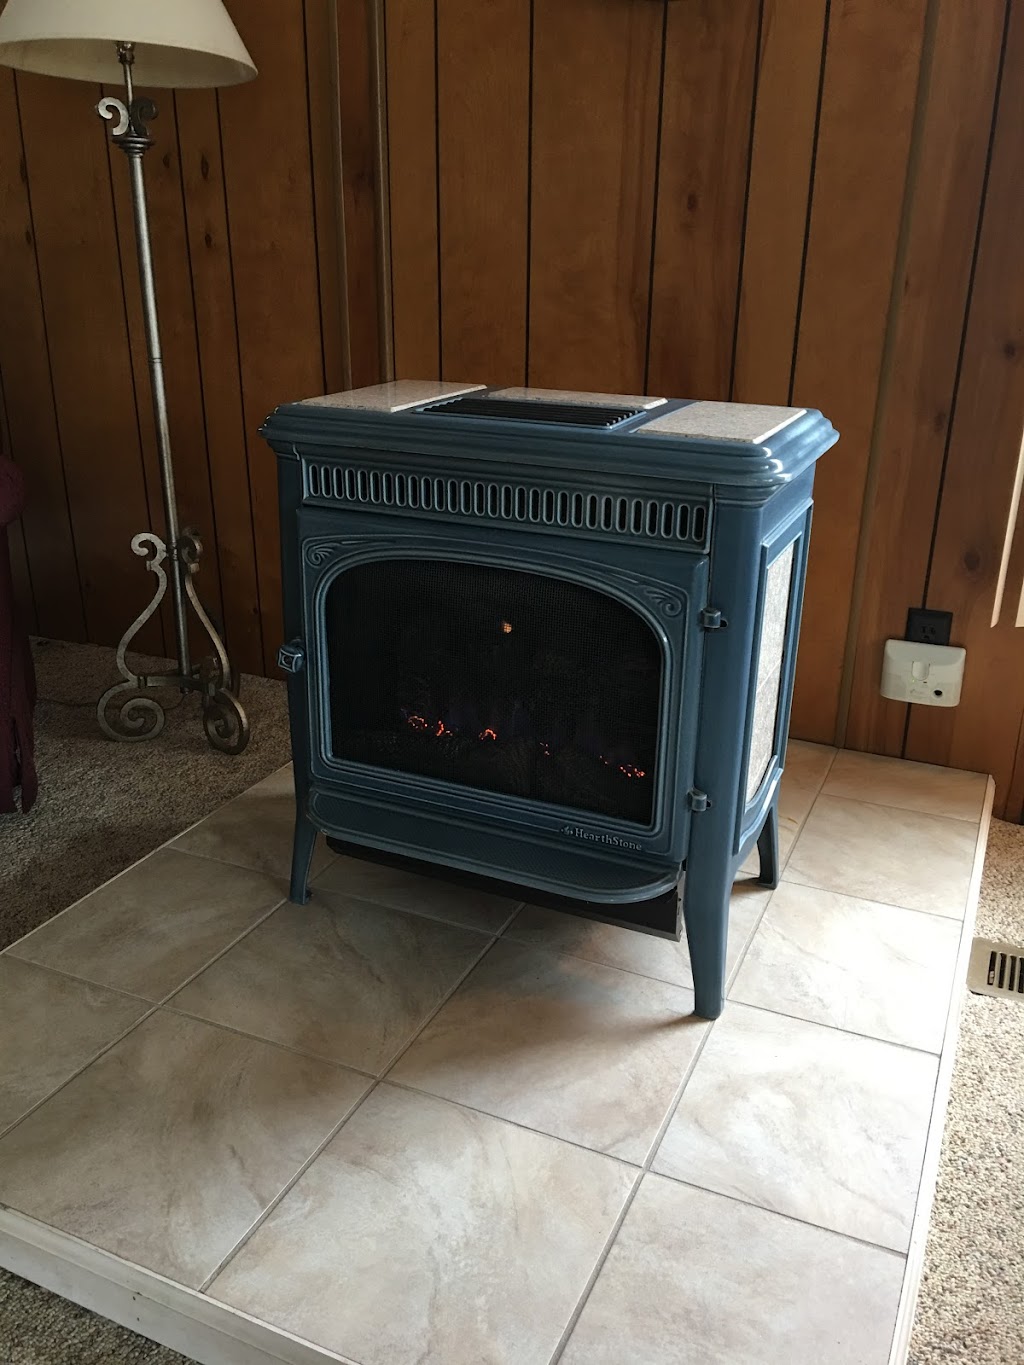 AAAA Aaron Repair Services / Fireplaces First Service Co. | 330 Lake Champlain Dr, Little Egg Harbor Township, NJ 08087 | Phone: (609) 294-3121